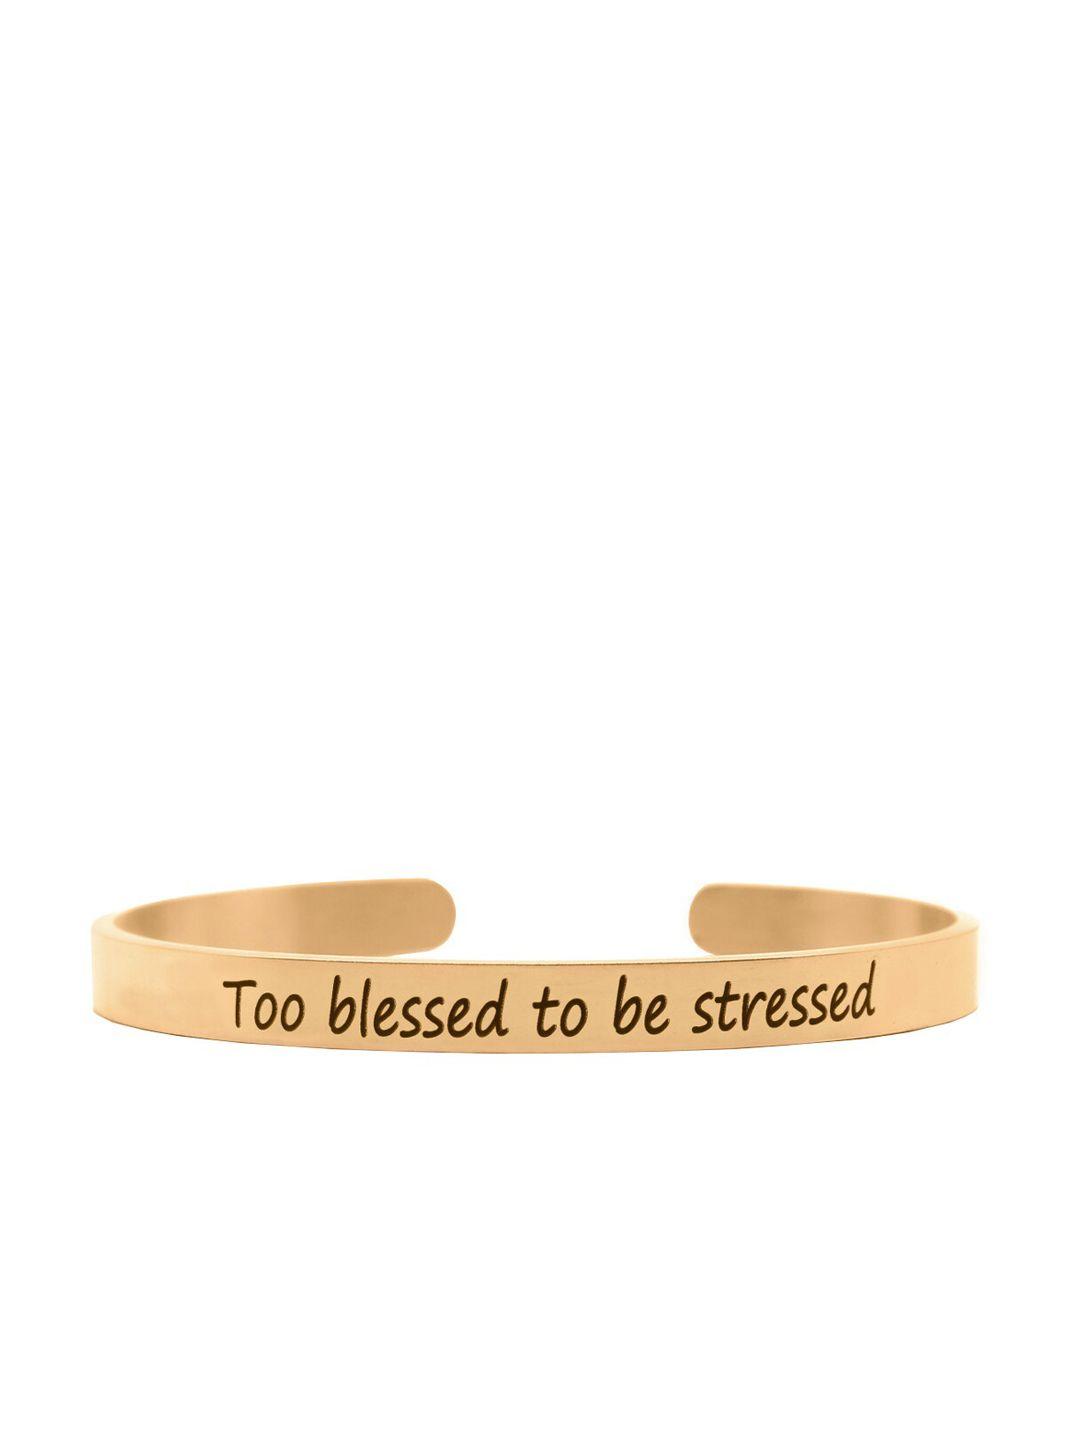 joker & witch rose gold-plated too blessed to be stressed mantra cuff bracelet